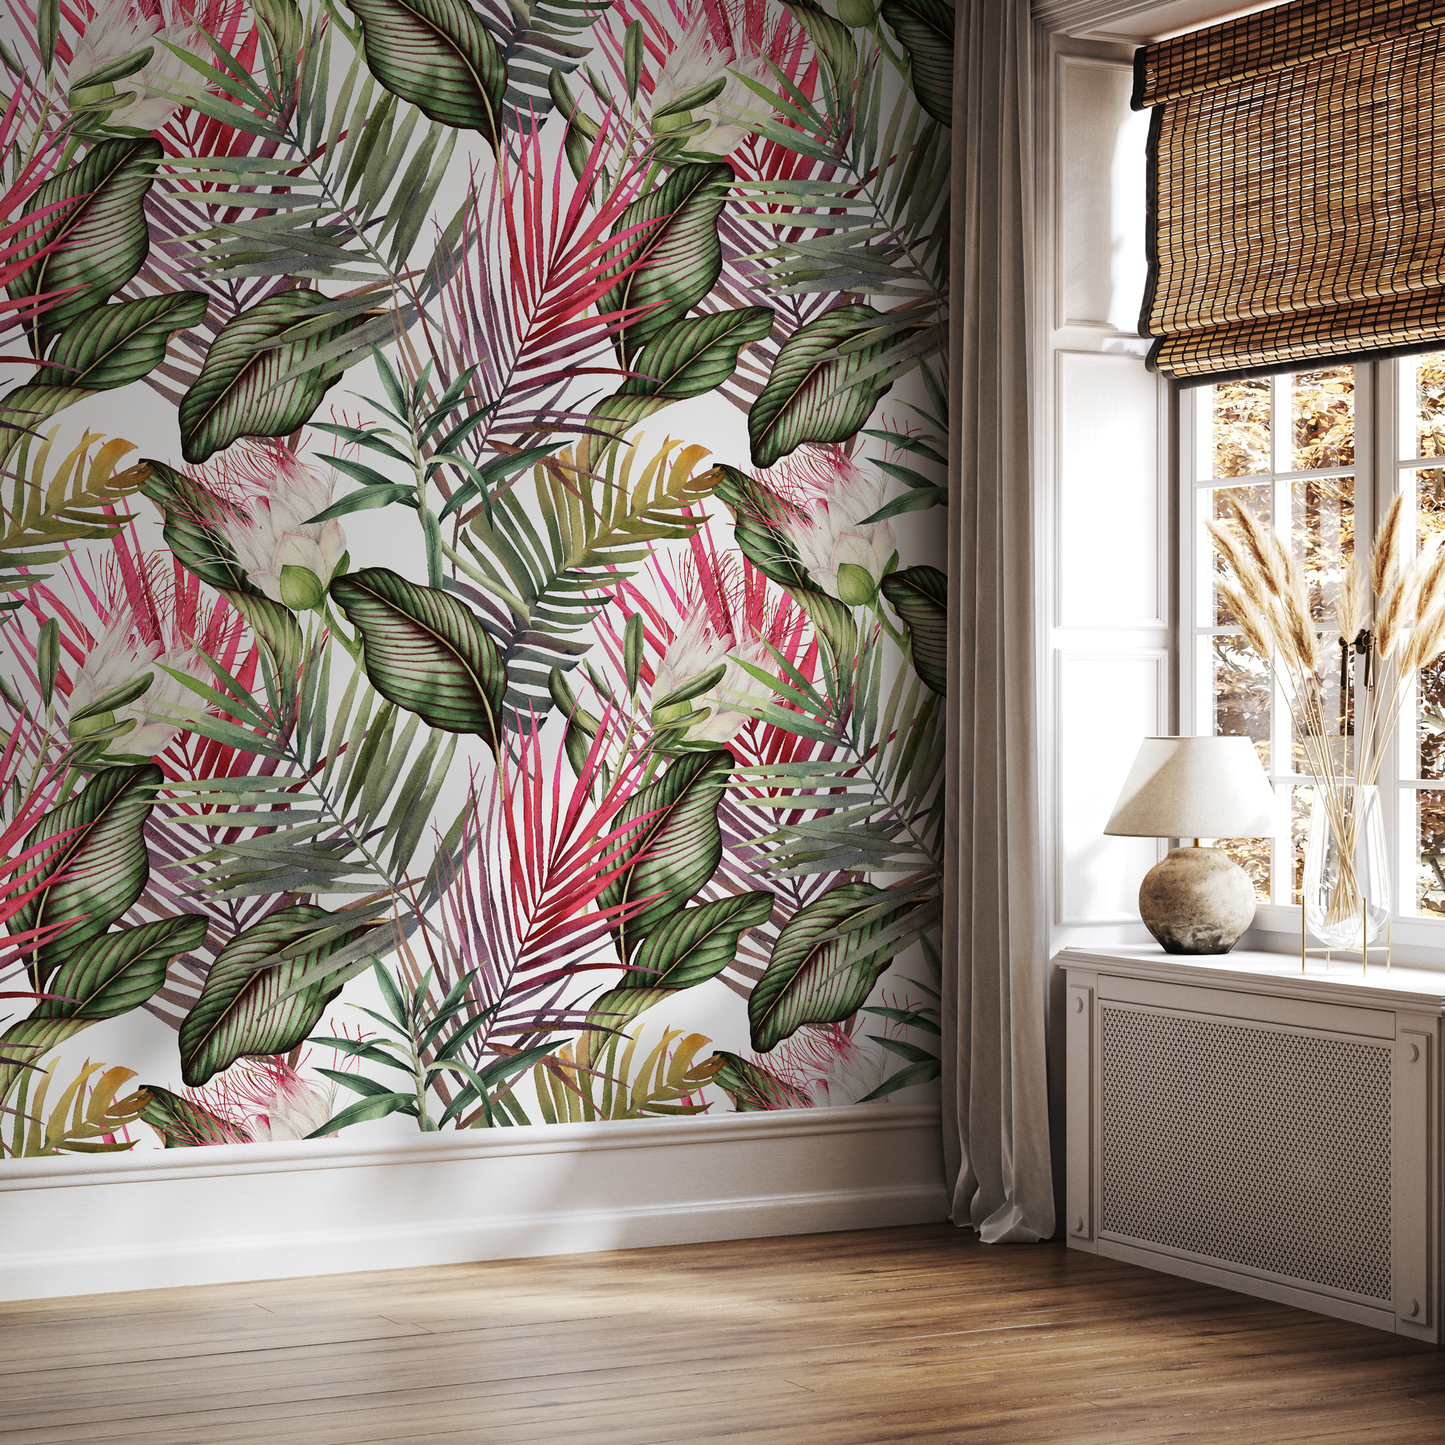 Removable Wallpaper Peel and Stick Wallpaper Wall Paper Wall Mural - Colorful Tropical Leaves Wallpaper - A444